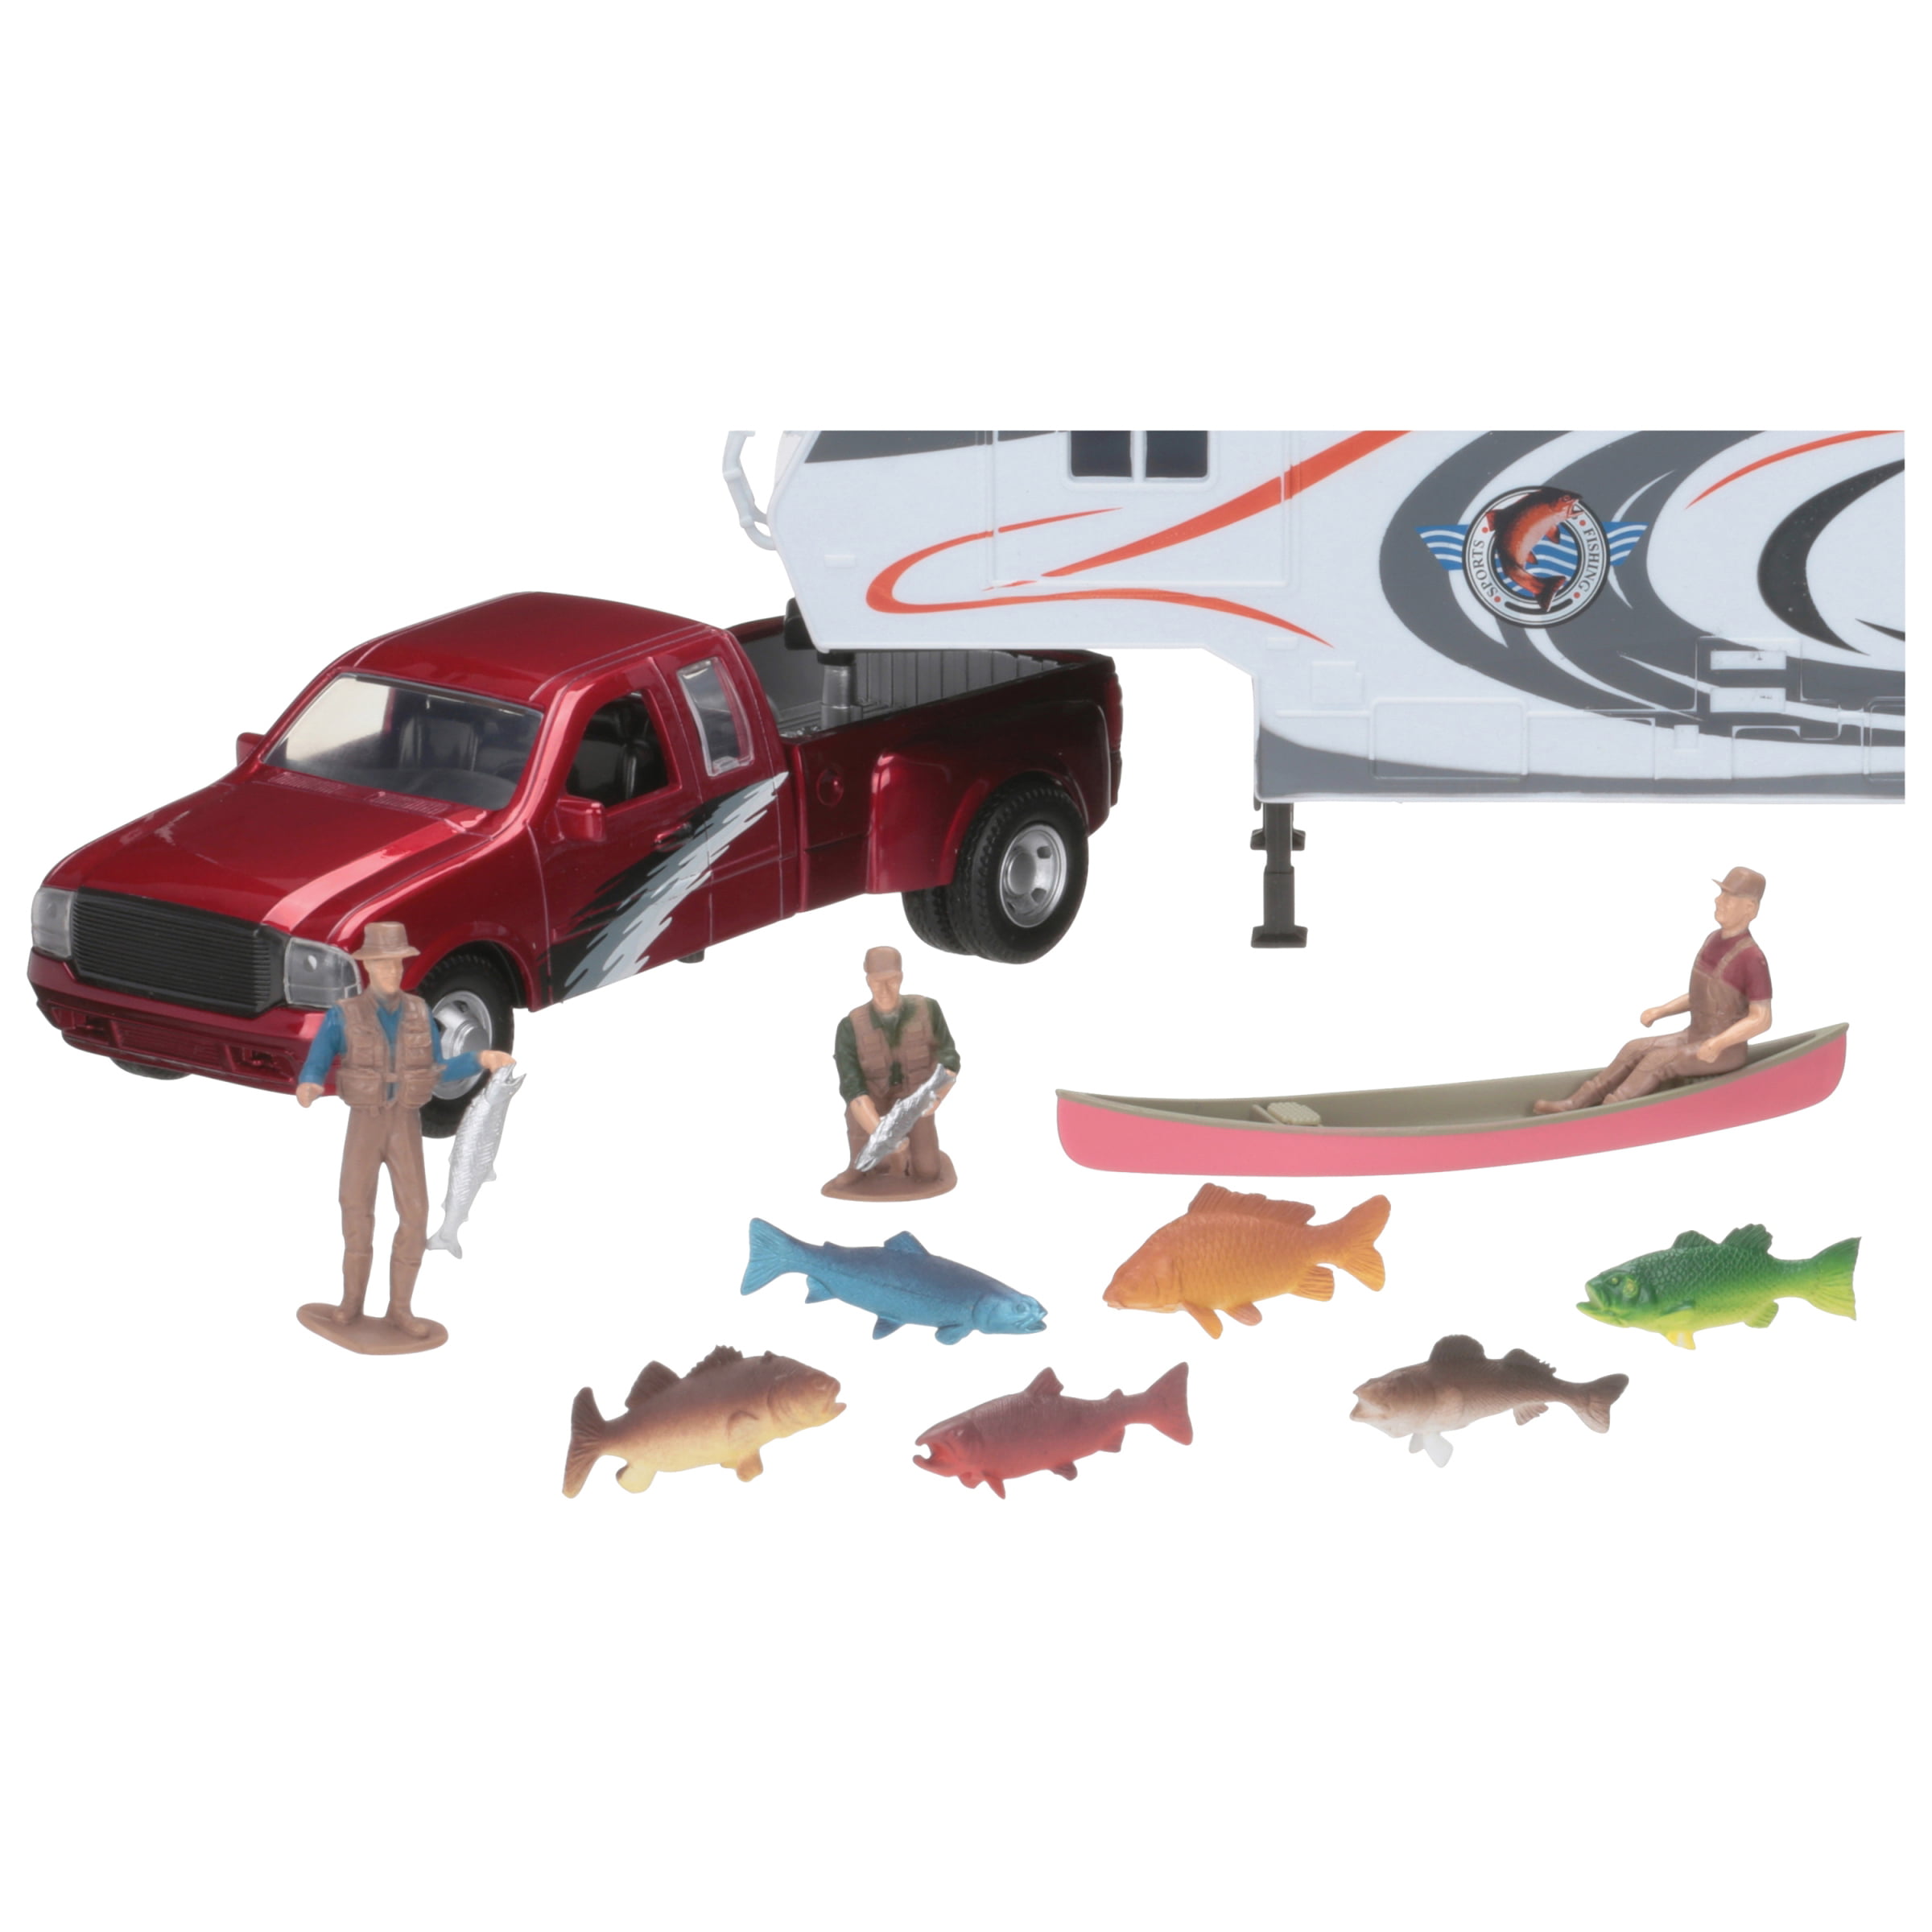 Fishing Camper Playset by New Ray 1-32 Scale. Toy